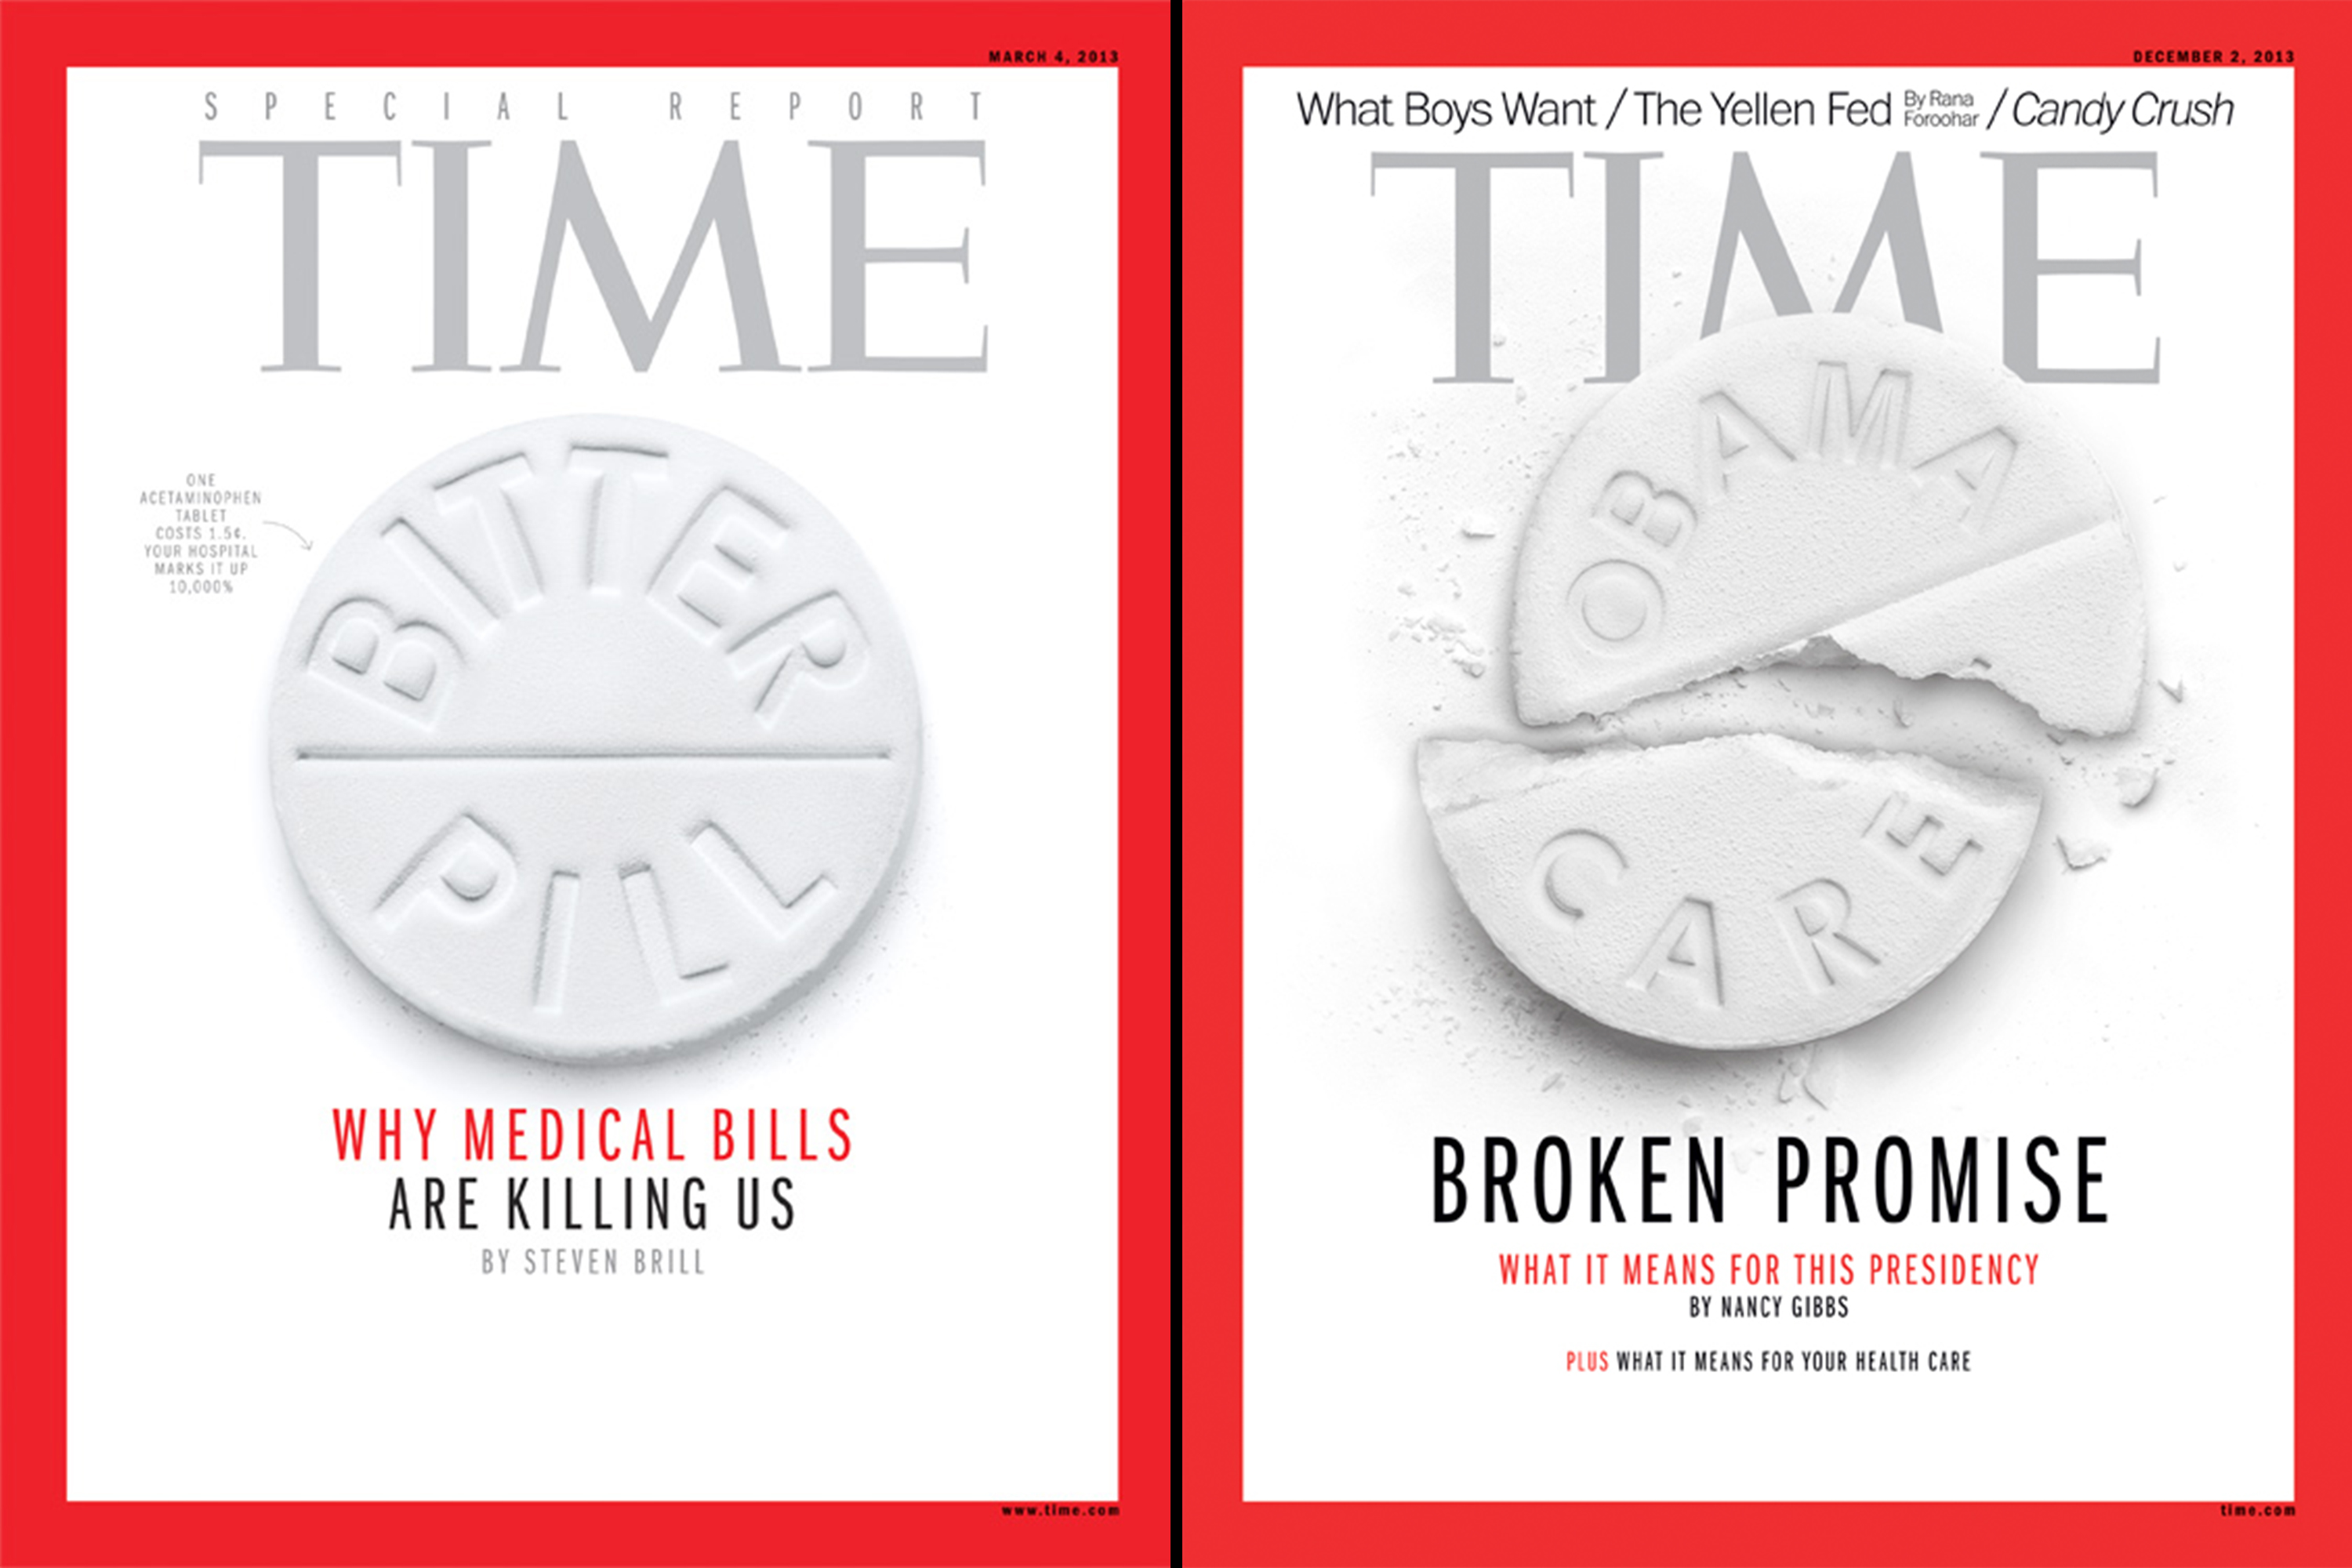 Bitter Pill," March 4, 2013; "Obama Care," Jan. 19, 2015 (Illustrations by Sean Freeman for TIME, ")